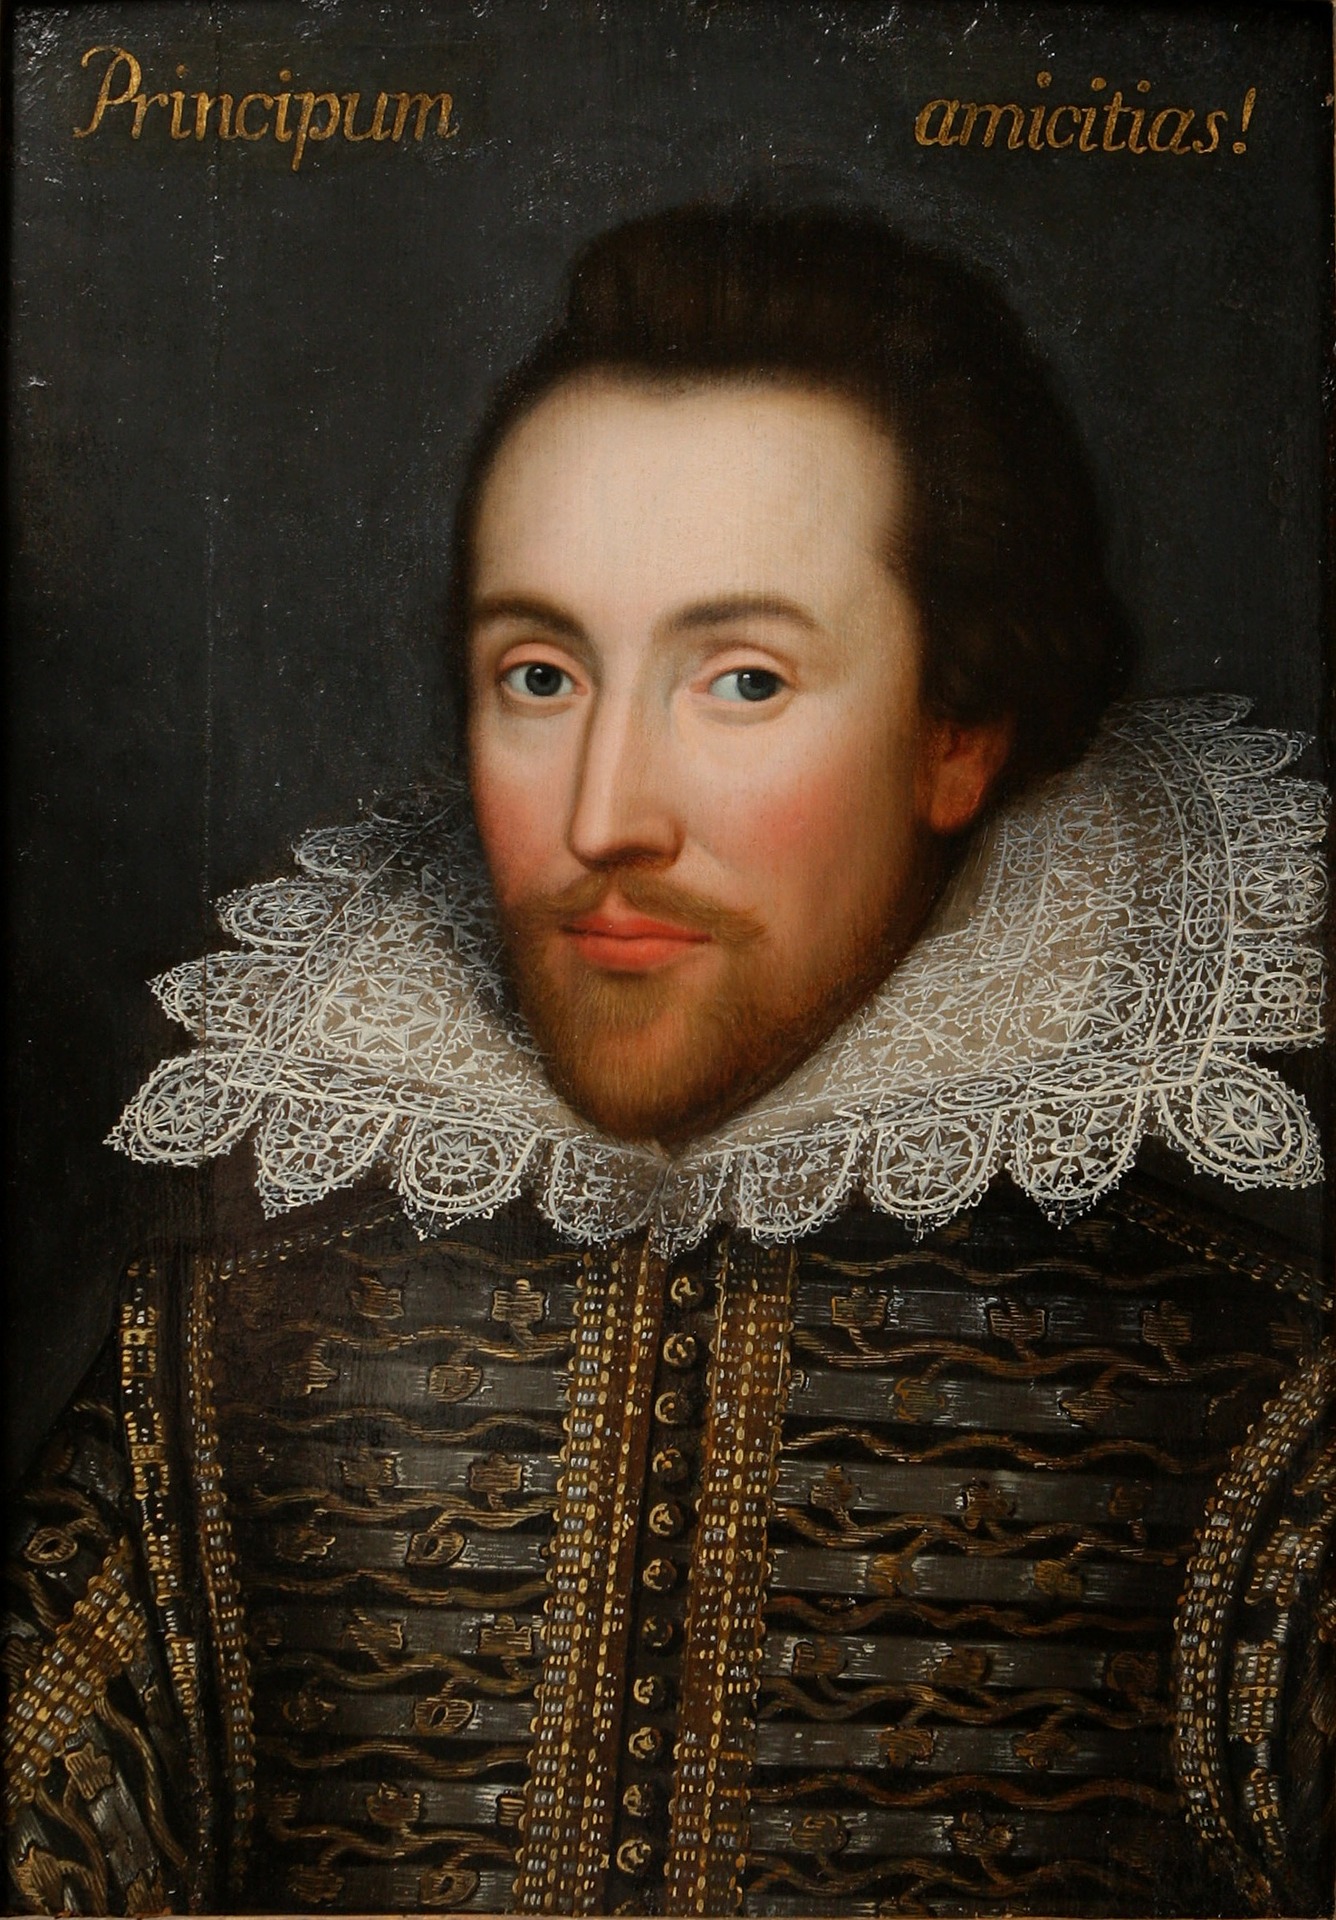 william shakespeare biography sparknotes